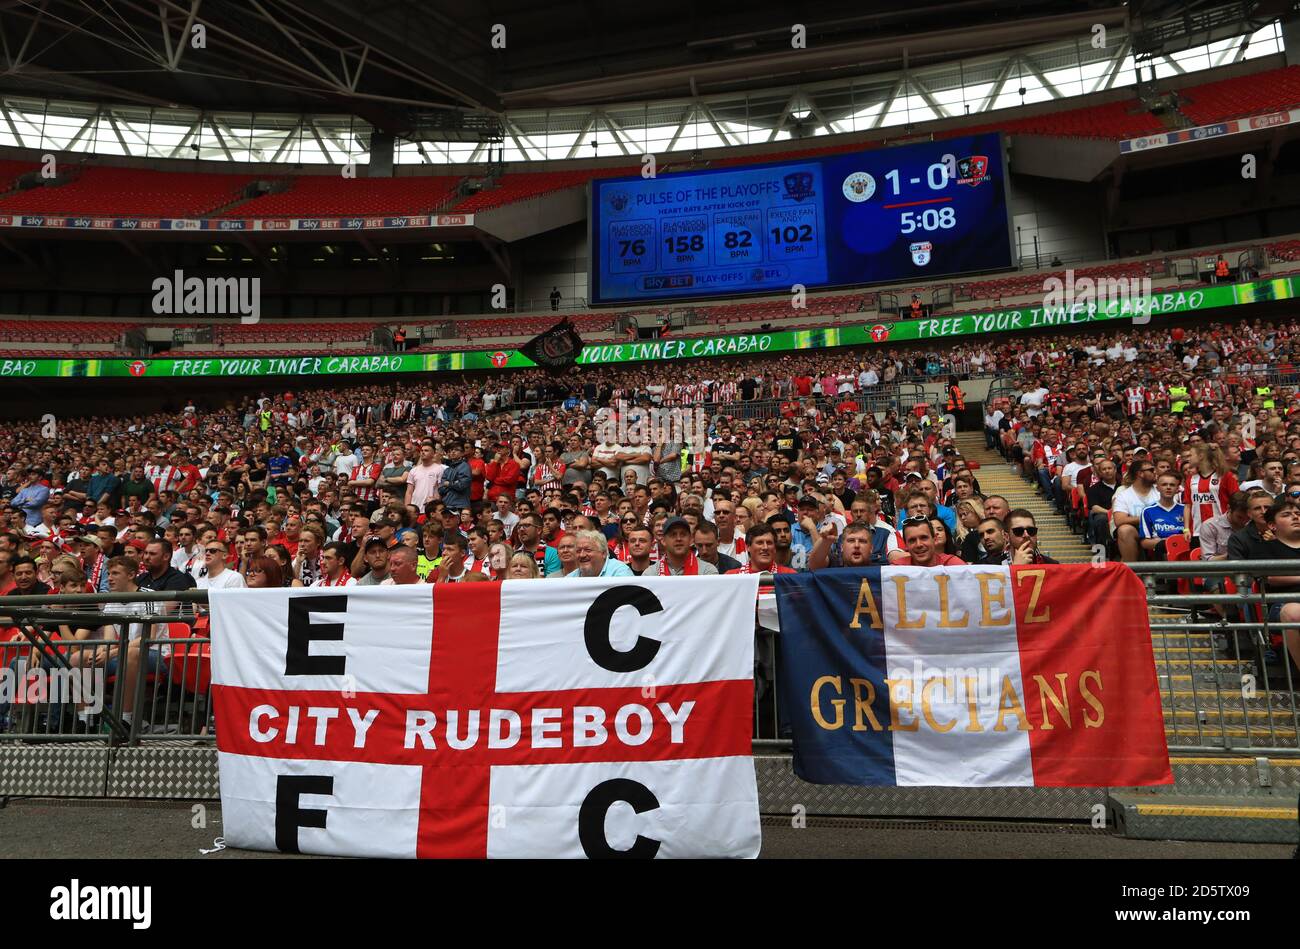 Exeter City fans in the stands infront of the scoreboard  Stock Photo